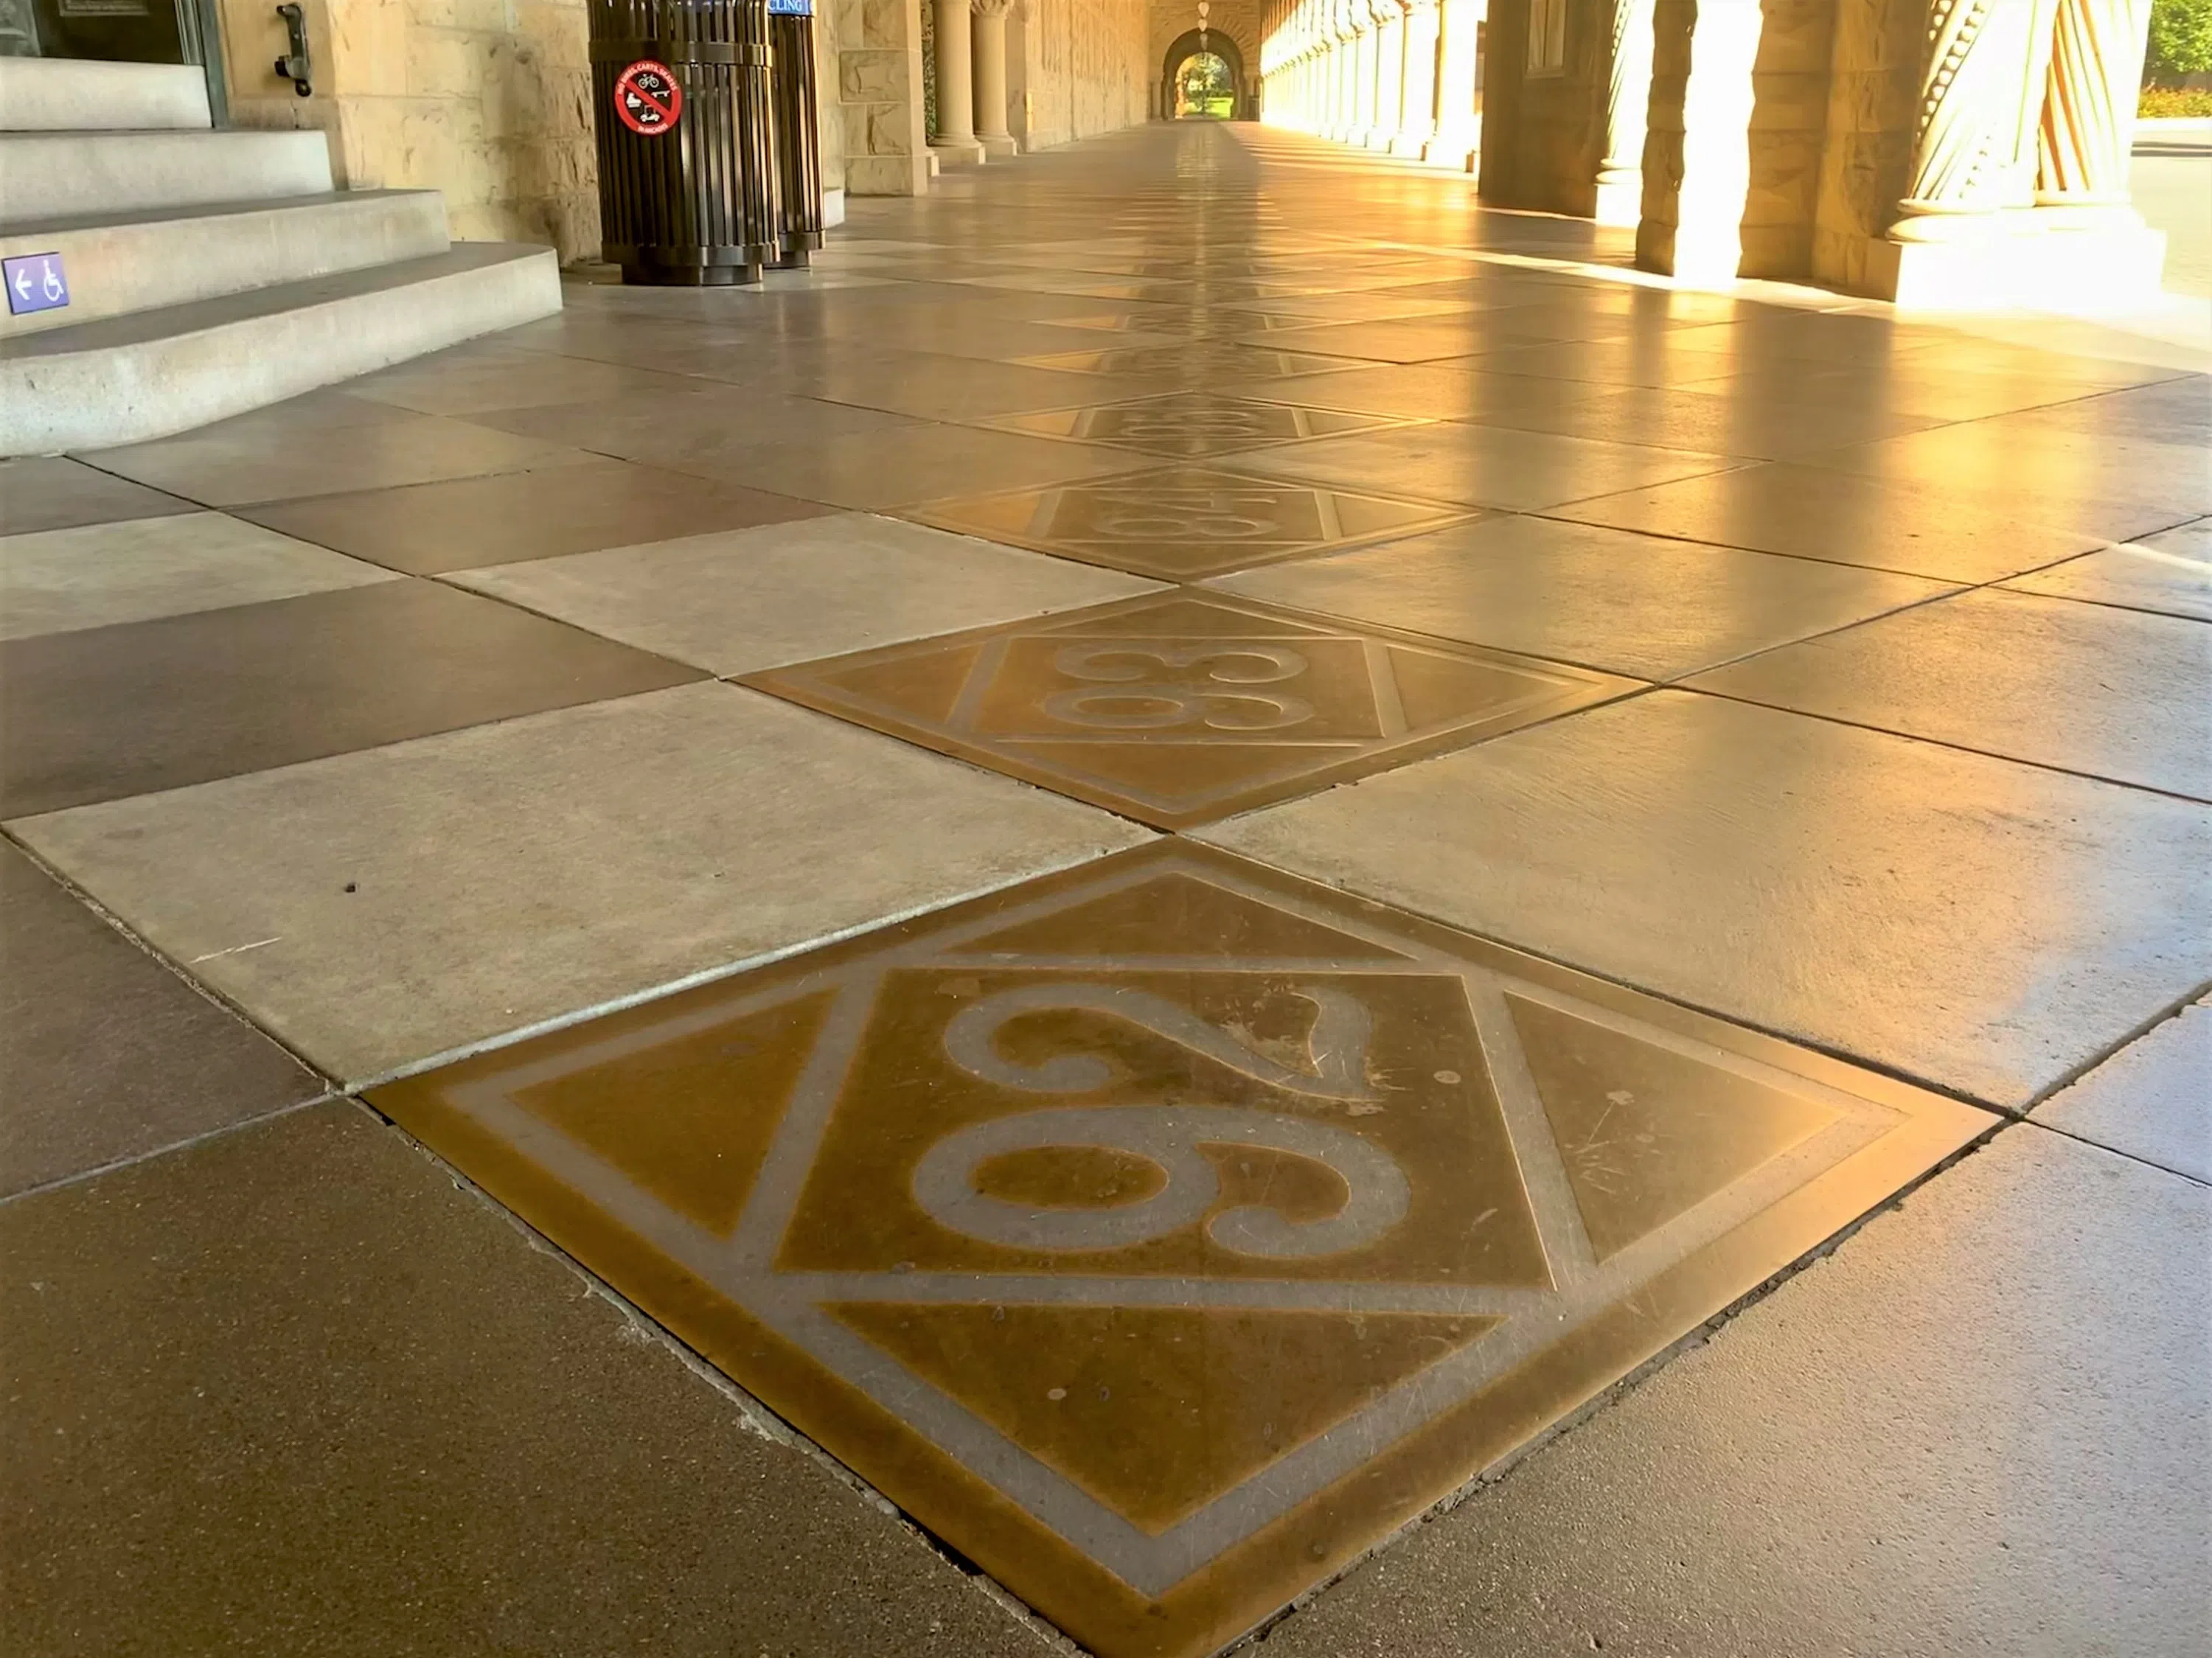 Diamond-shaped brass plates with class years on them line pathways of the arcades of the Main Quad.